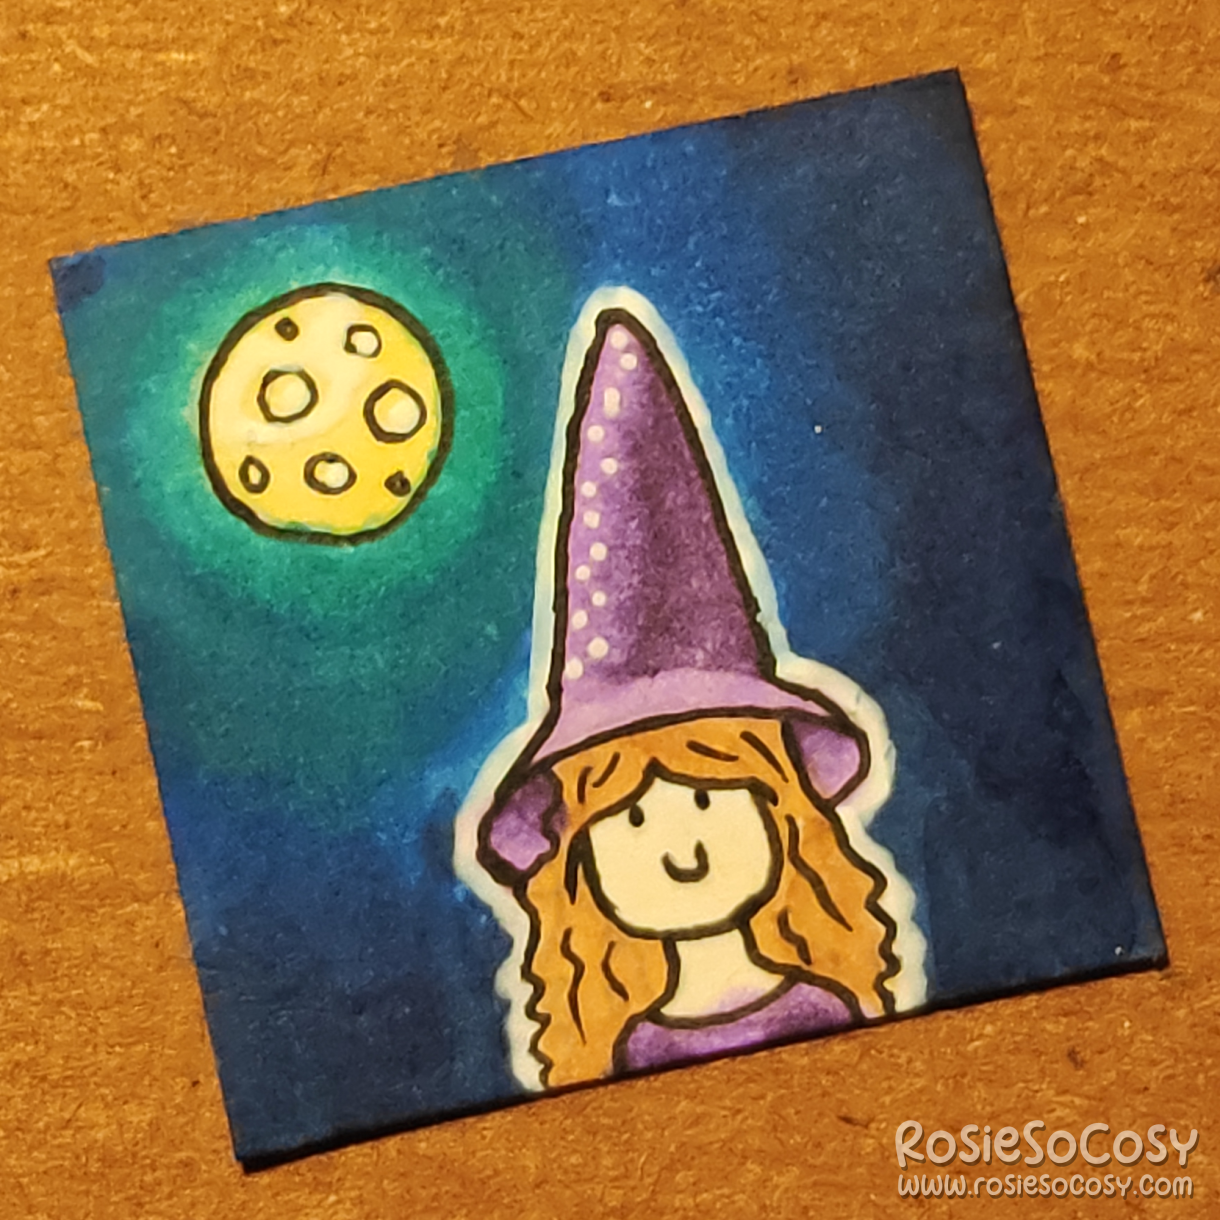 An inch sized drawing of a little witch/ She is wearing a purple outfit and pointy hat. It's dark outside and there is a full moon glowing in the background.